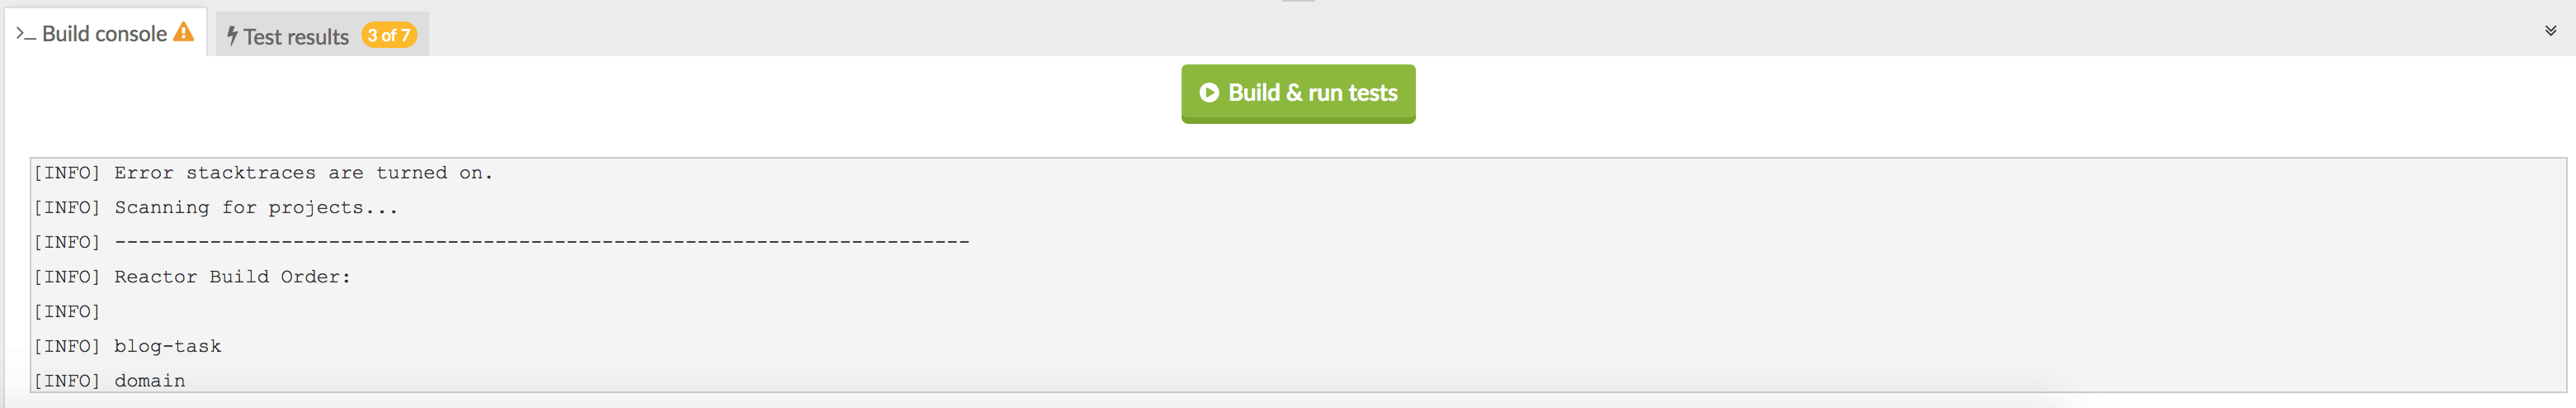 The build console in DevSkiller's work sample test